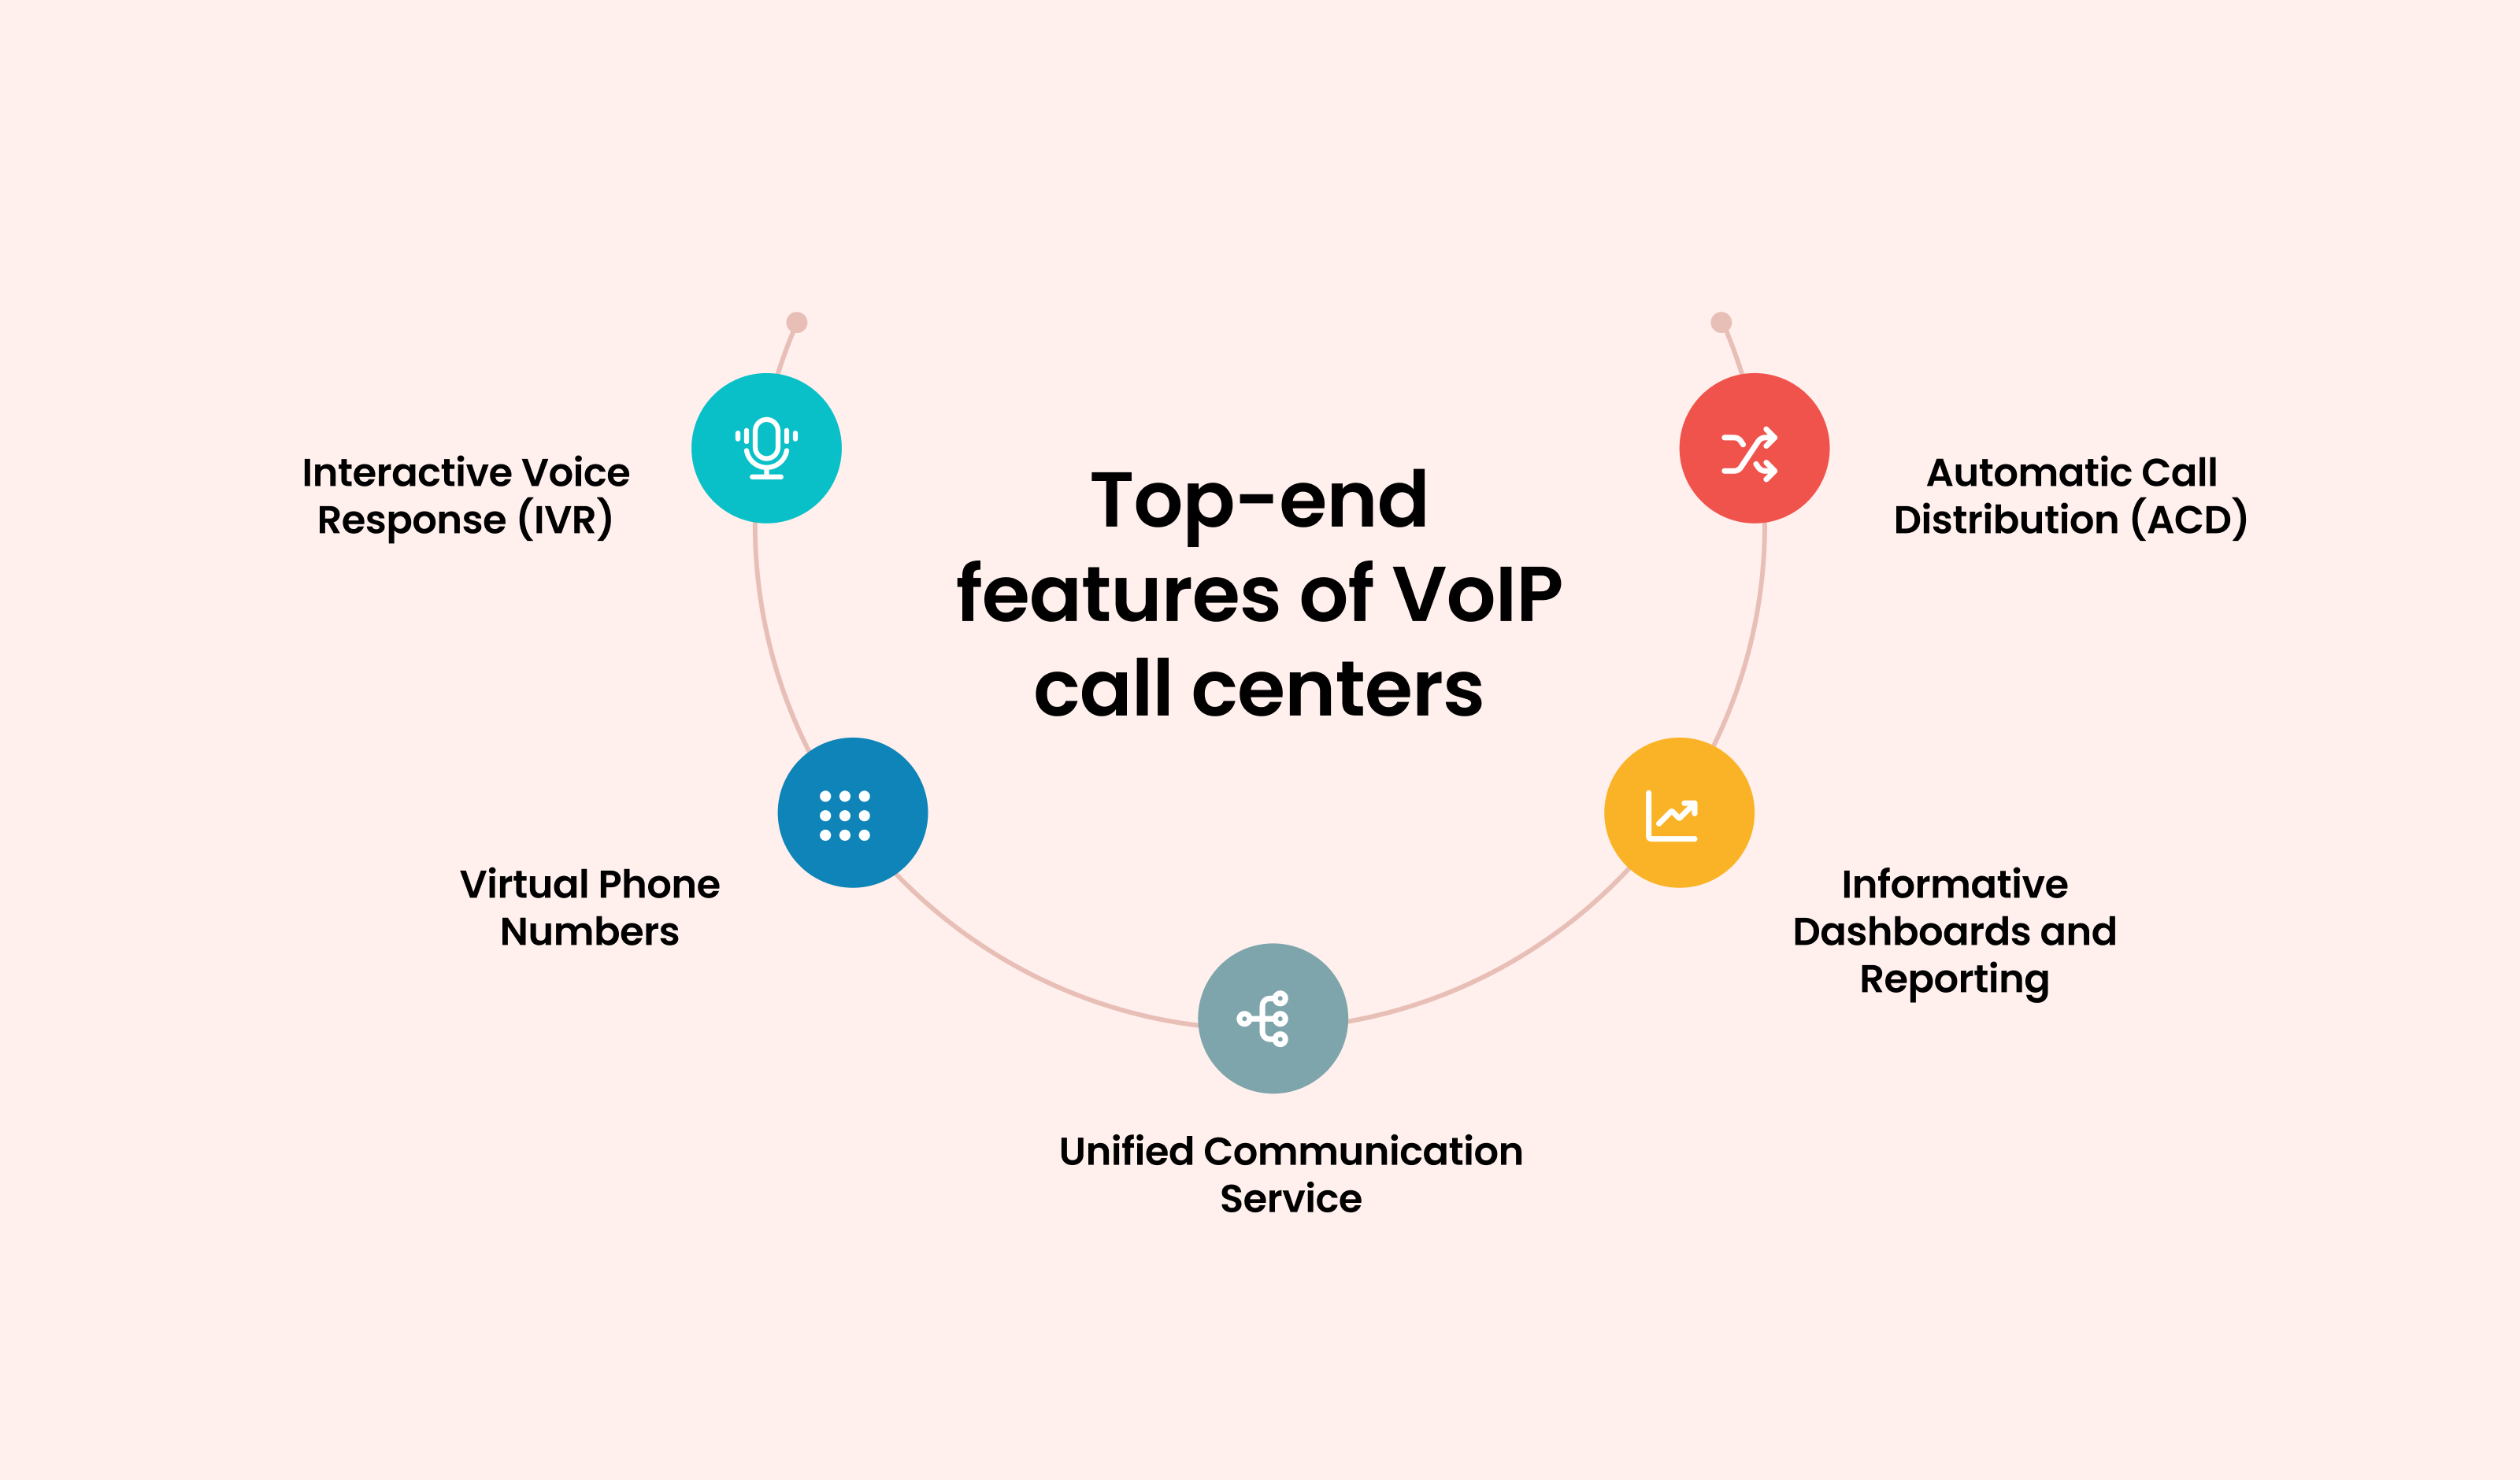 Top-end features of VoIP Call Centers: